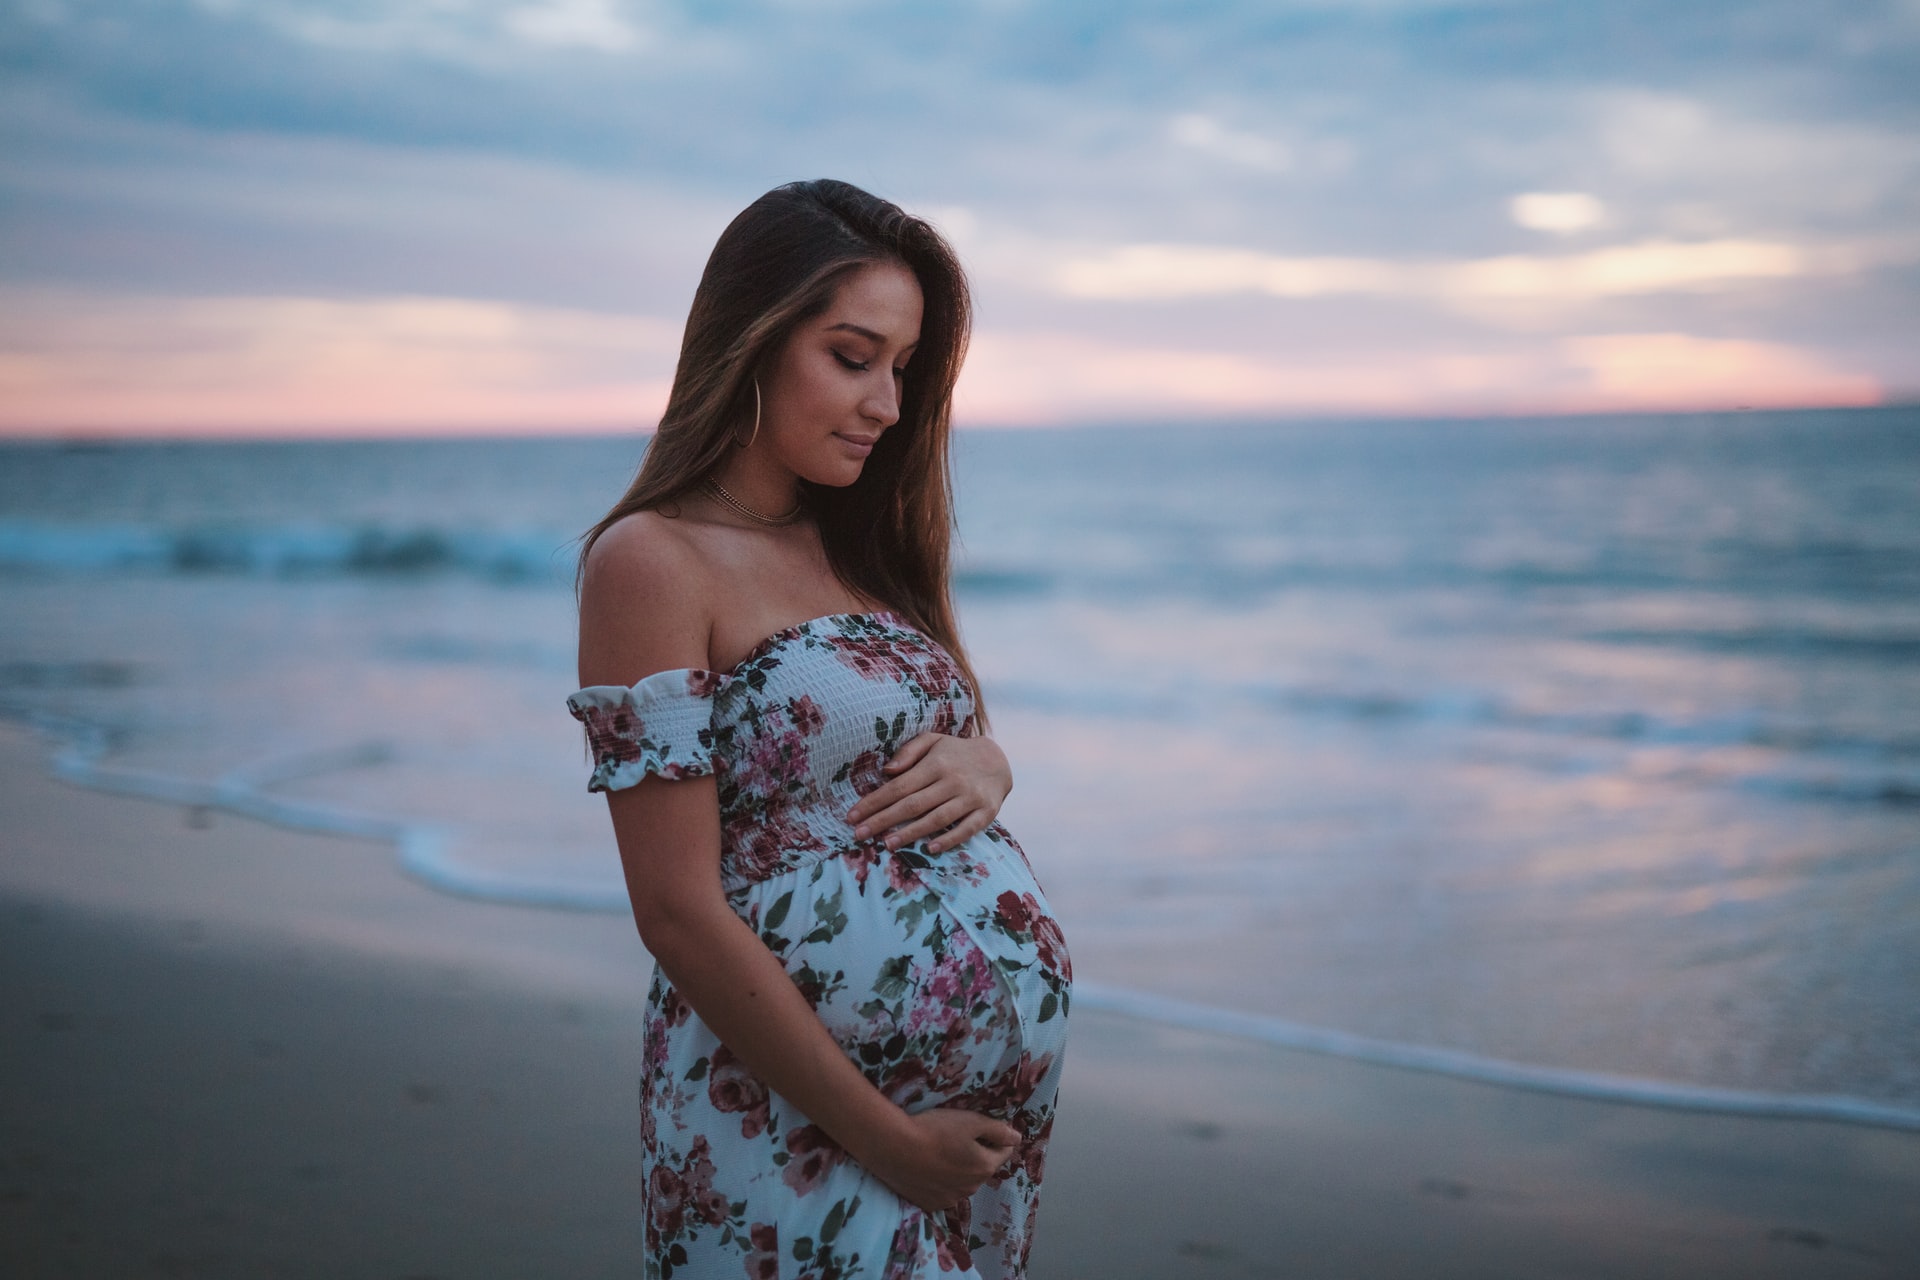 Little Tips To Make Your Pregnancy Happier, Healthier & Easier